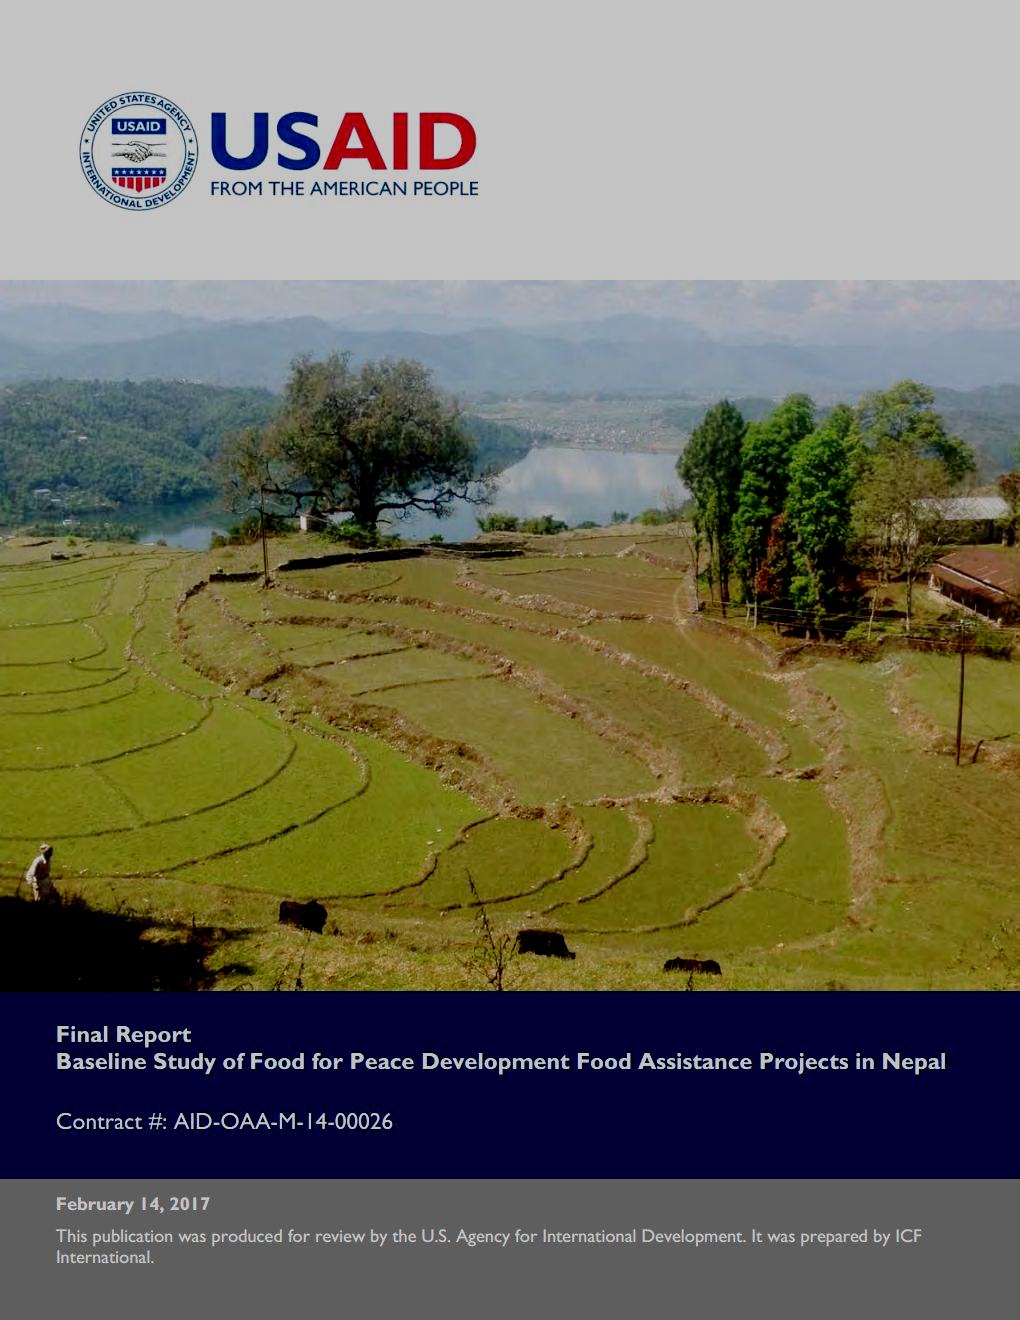 Baseline Study of Food for Peace Development Food Assistance Projects in Nepal